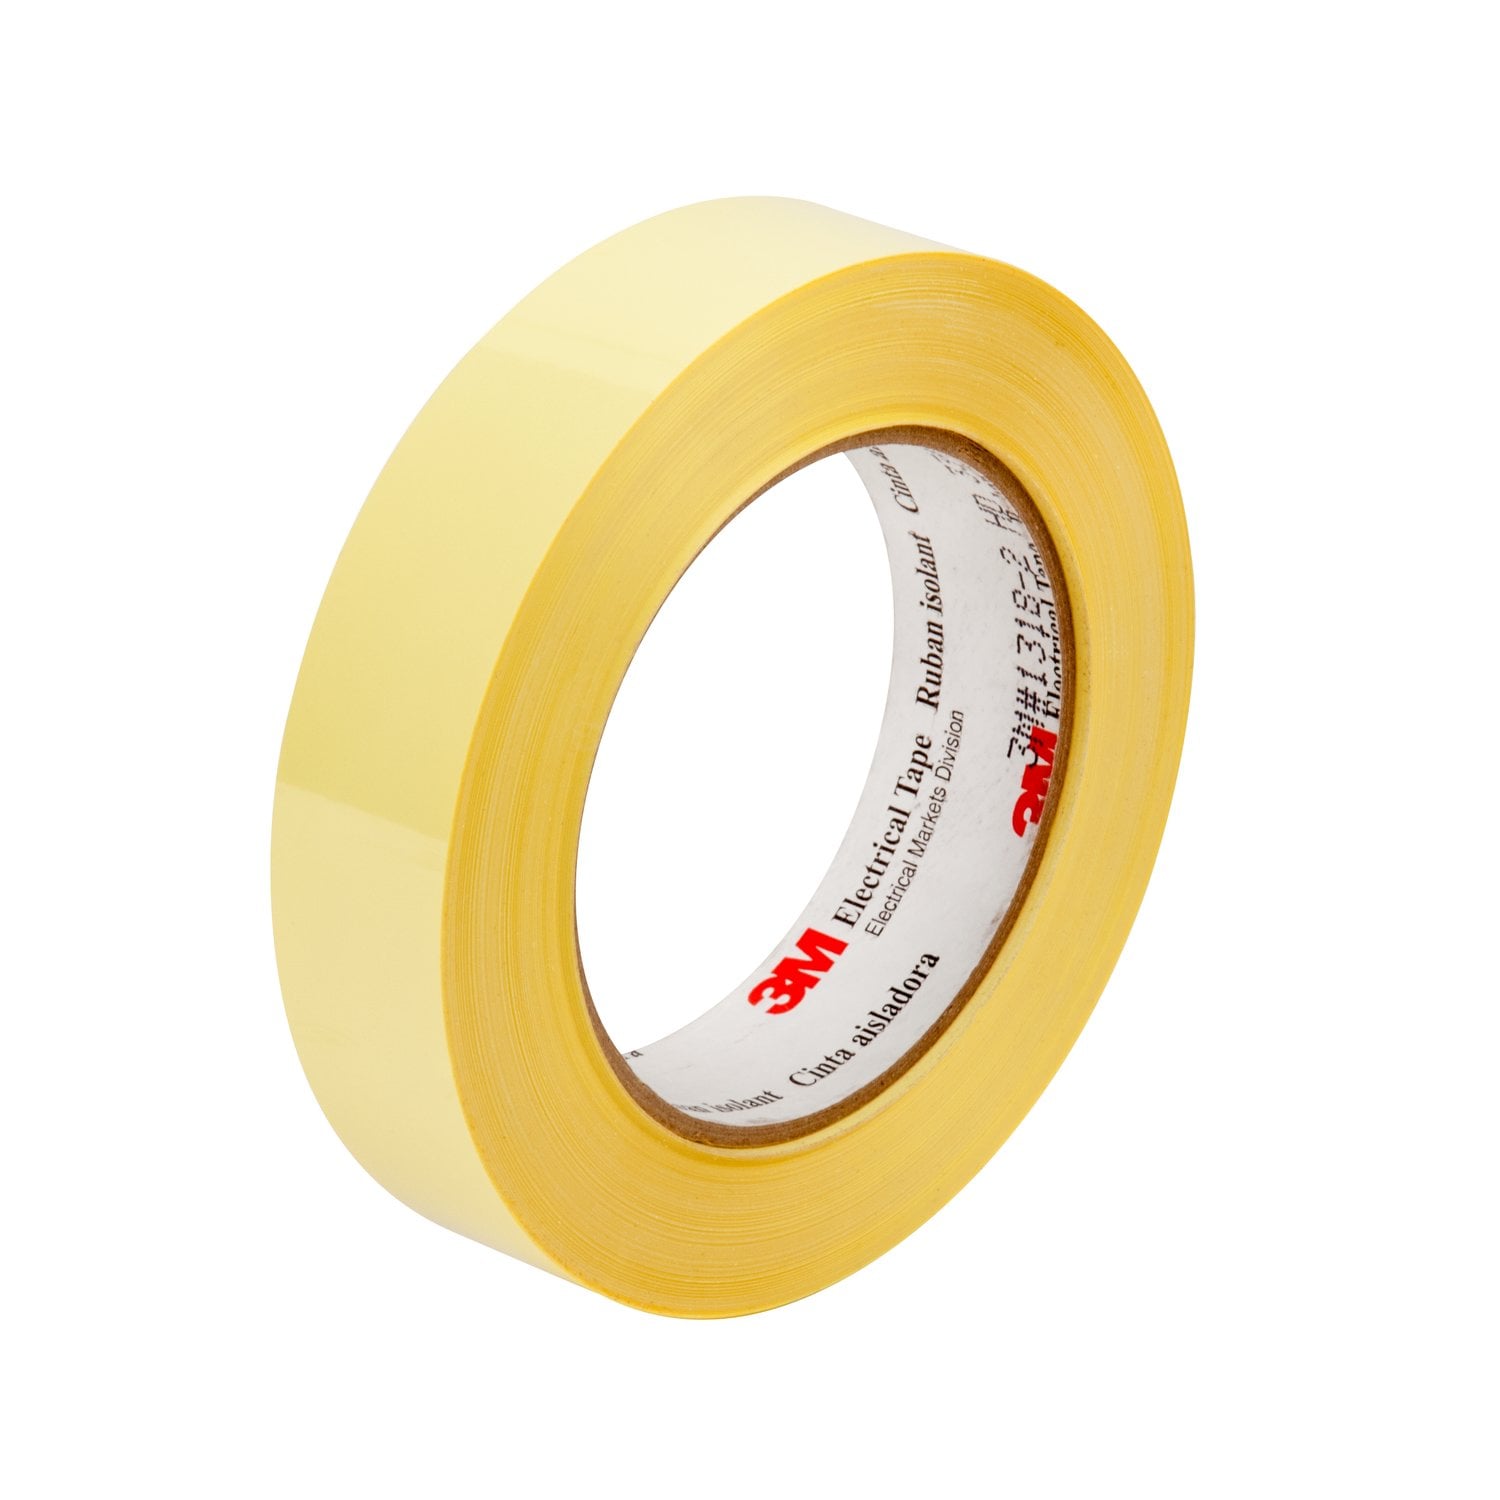 7000132836 - 3M Polyester Film Electrical Tape 1350F-1, yellow, 24"x72yd log roll,
on 3" plastic core, 1 Roll/Case